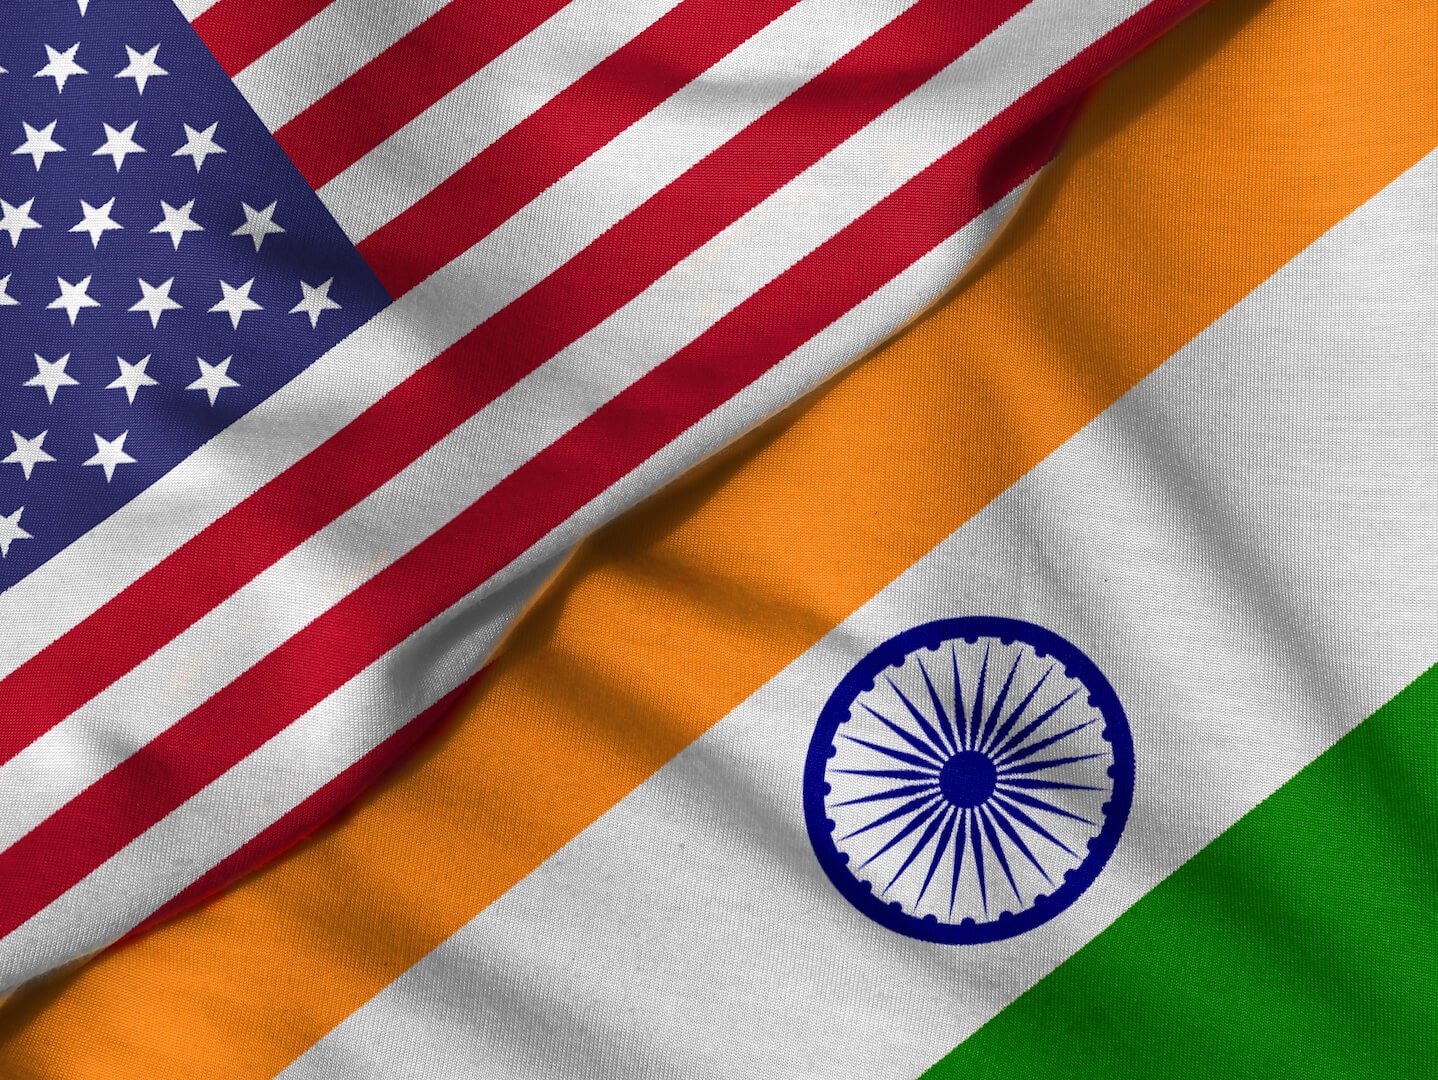 US and India launch hydrogen task force to accelerate the transition to net zero